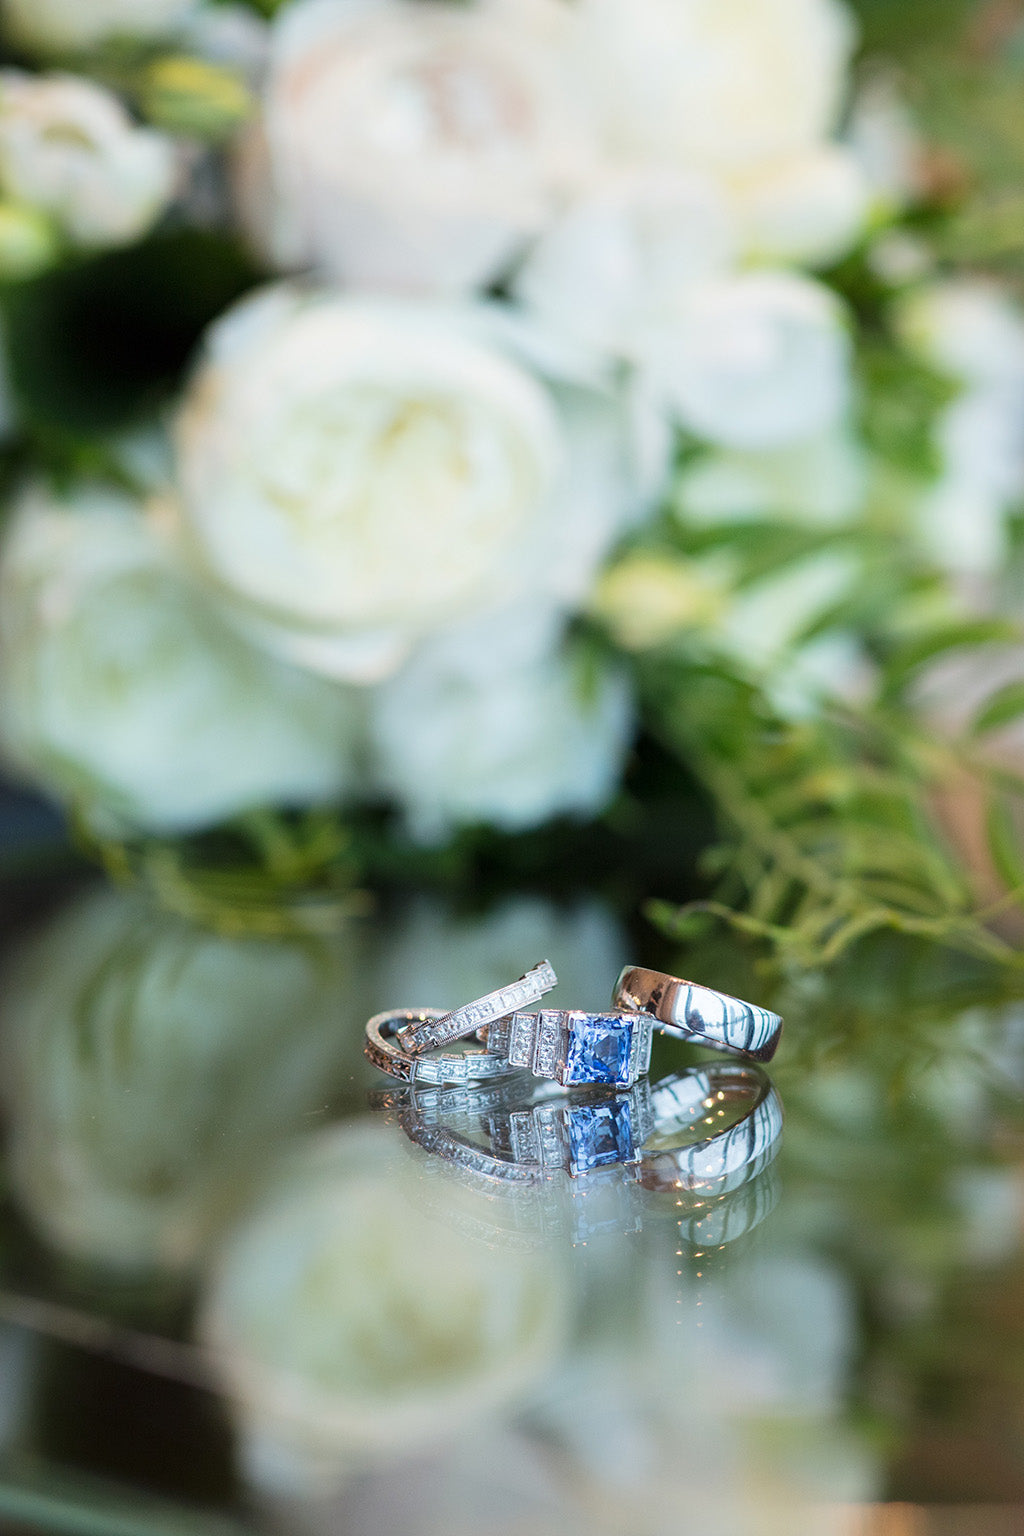 Wedding rings with wedding flowers in background